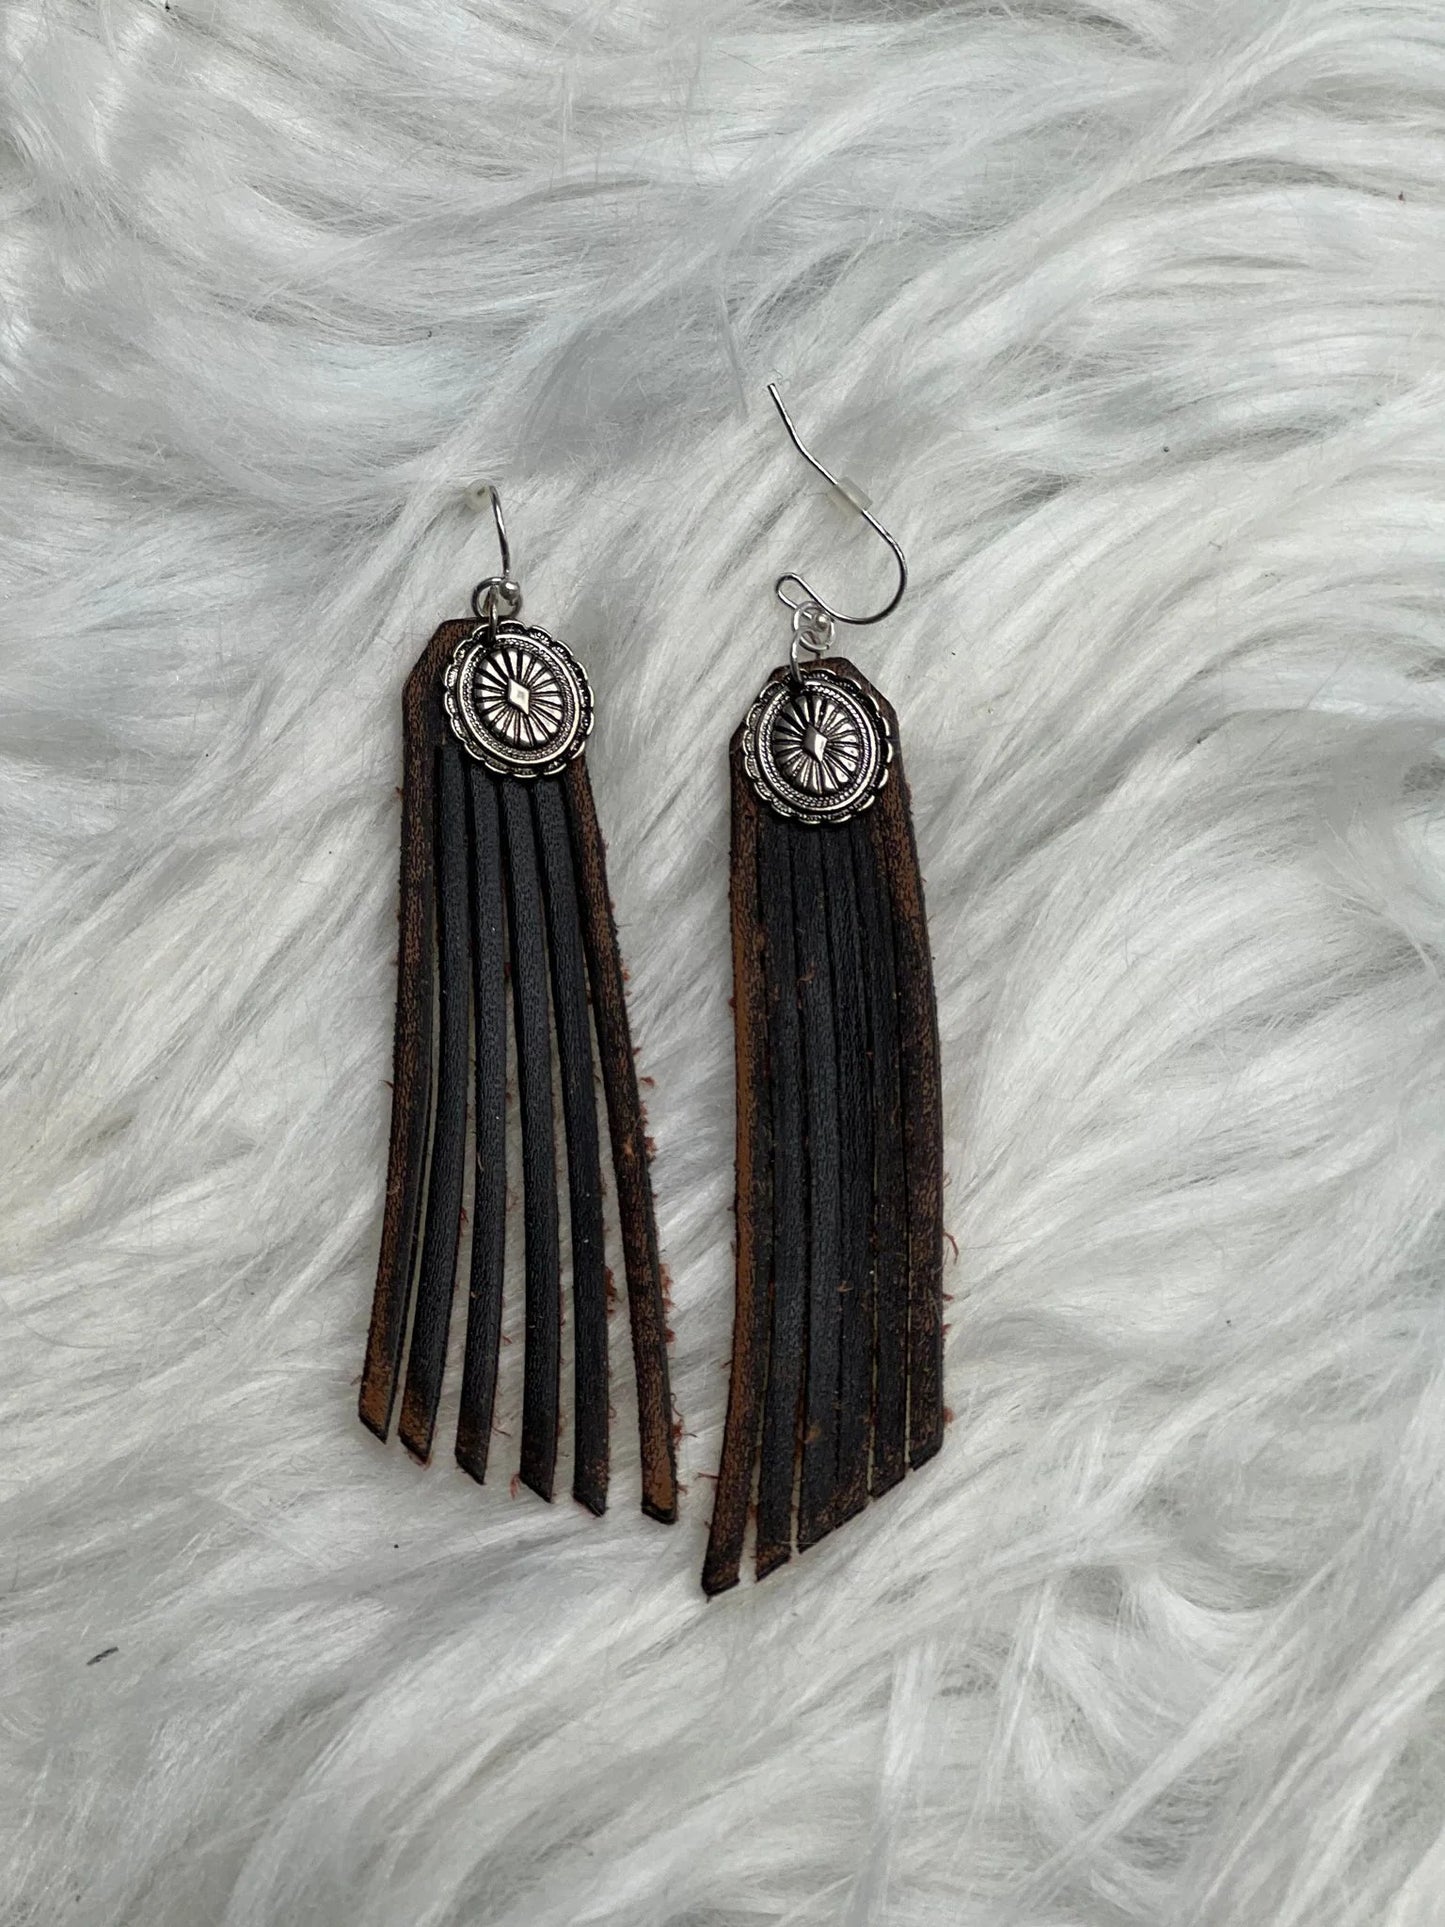 Silver Concho & Leather Fringe Earrings - Cowgirl Jewelry